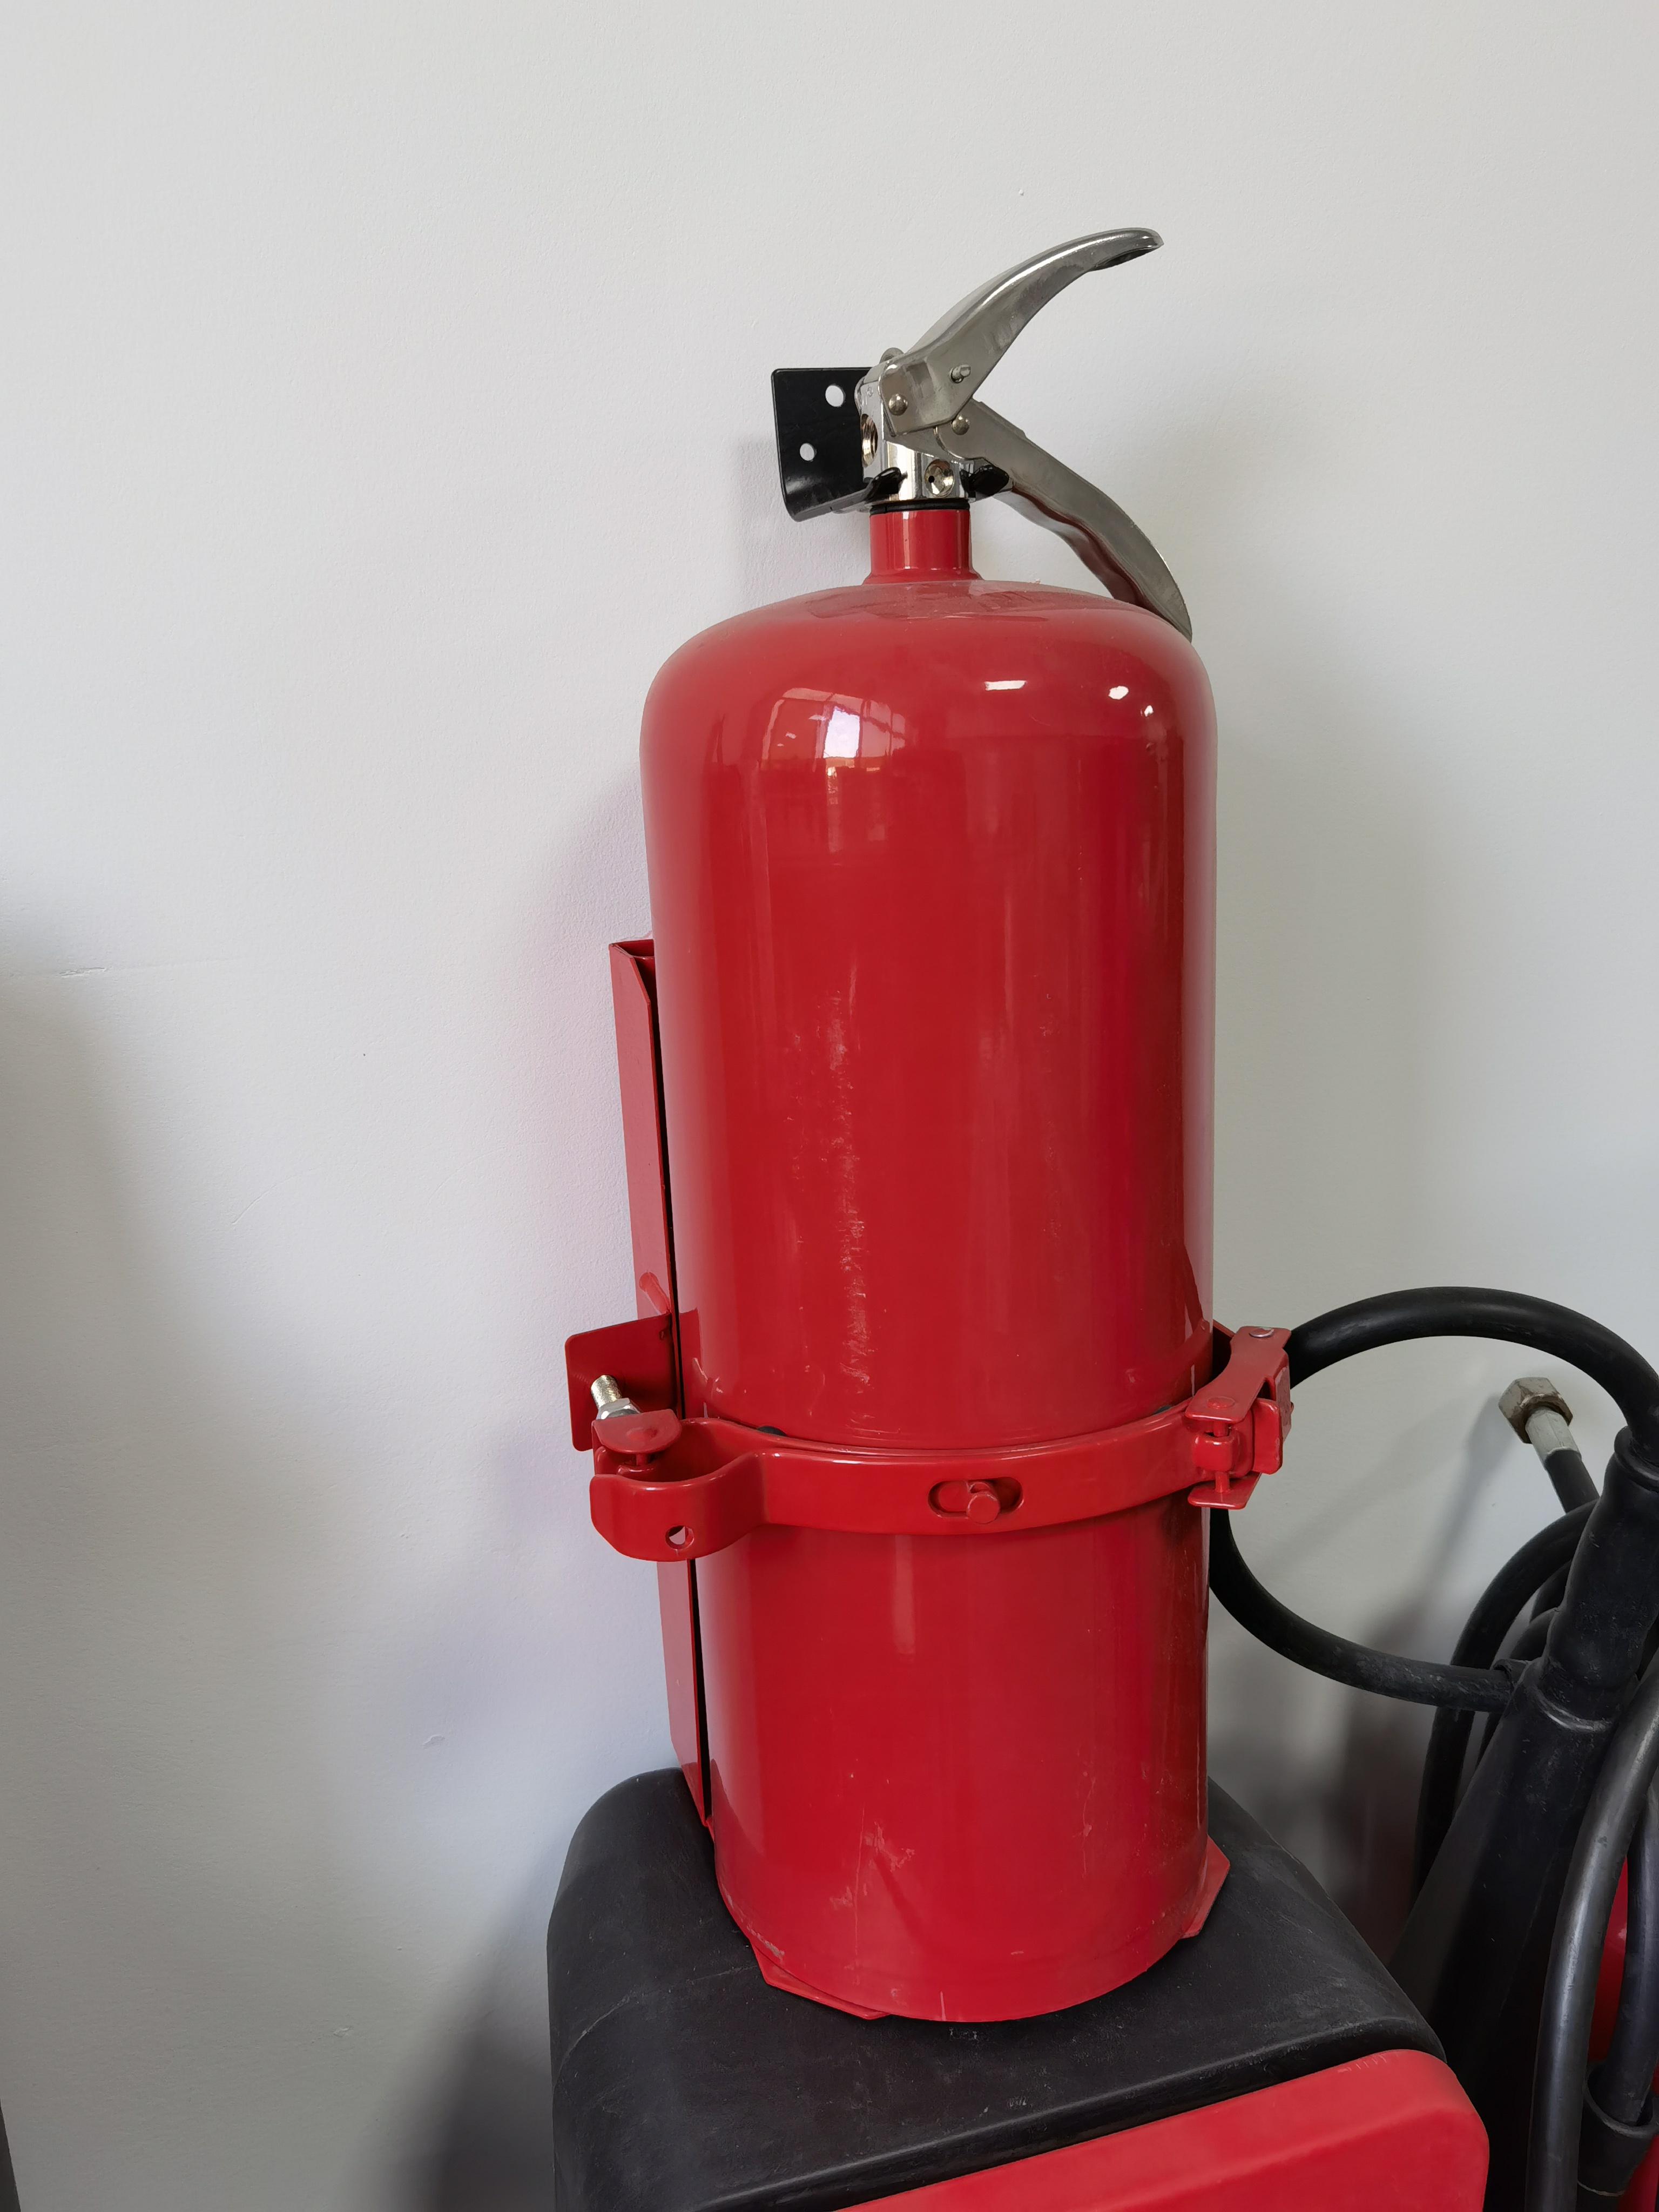 Dry Powder Fire Extinguisher for Wood With Pressure Gauge